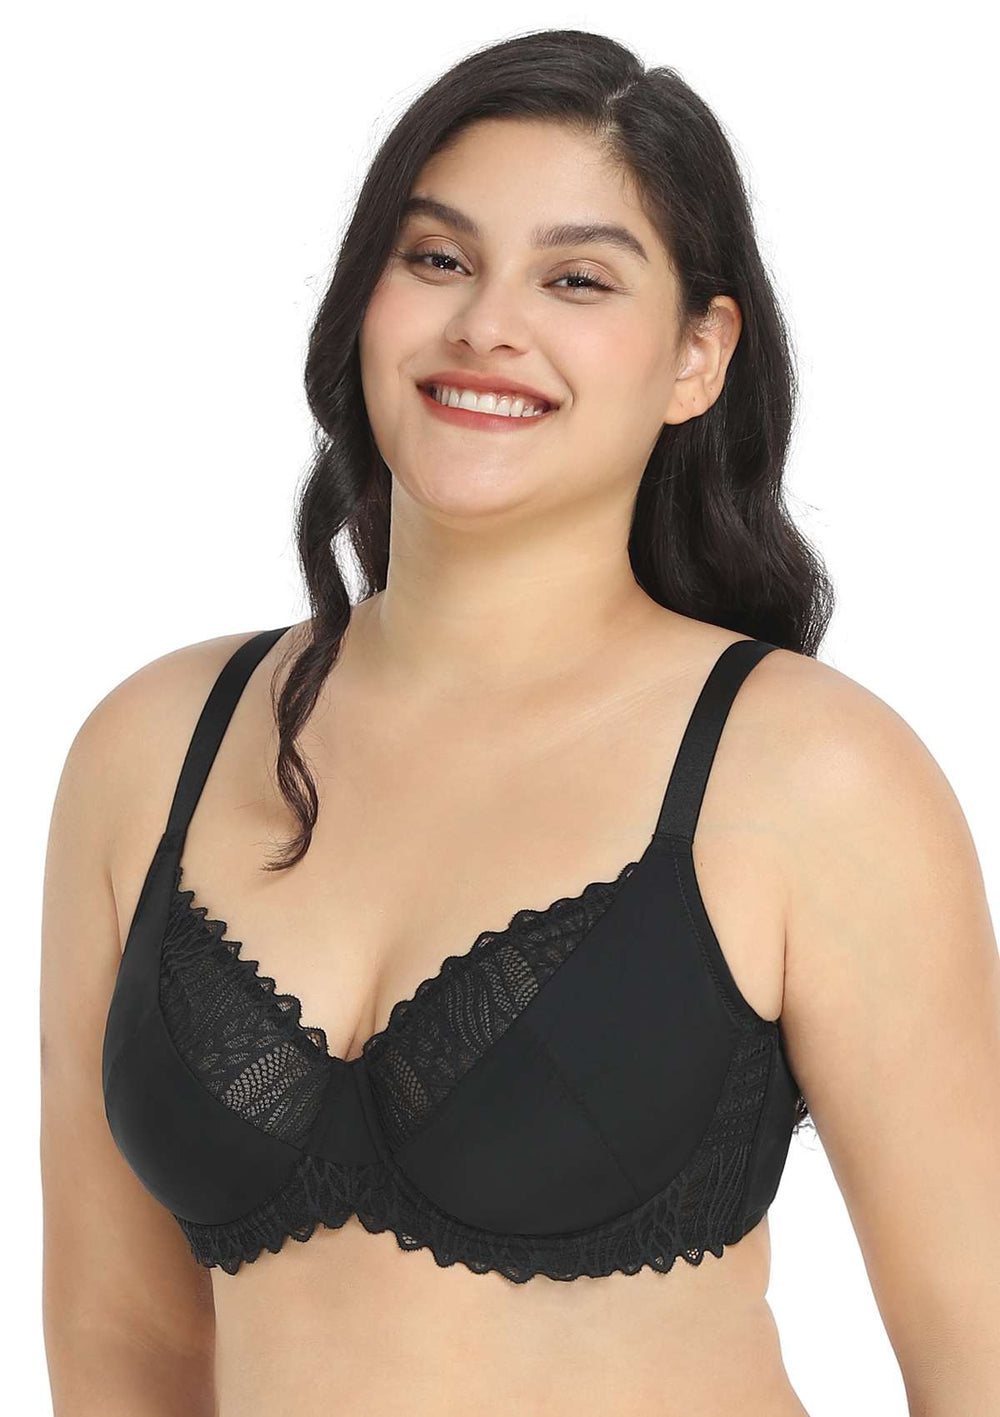 Bestsellers  Finest HSIA Bras Selected by Our Customers